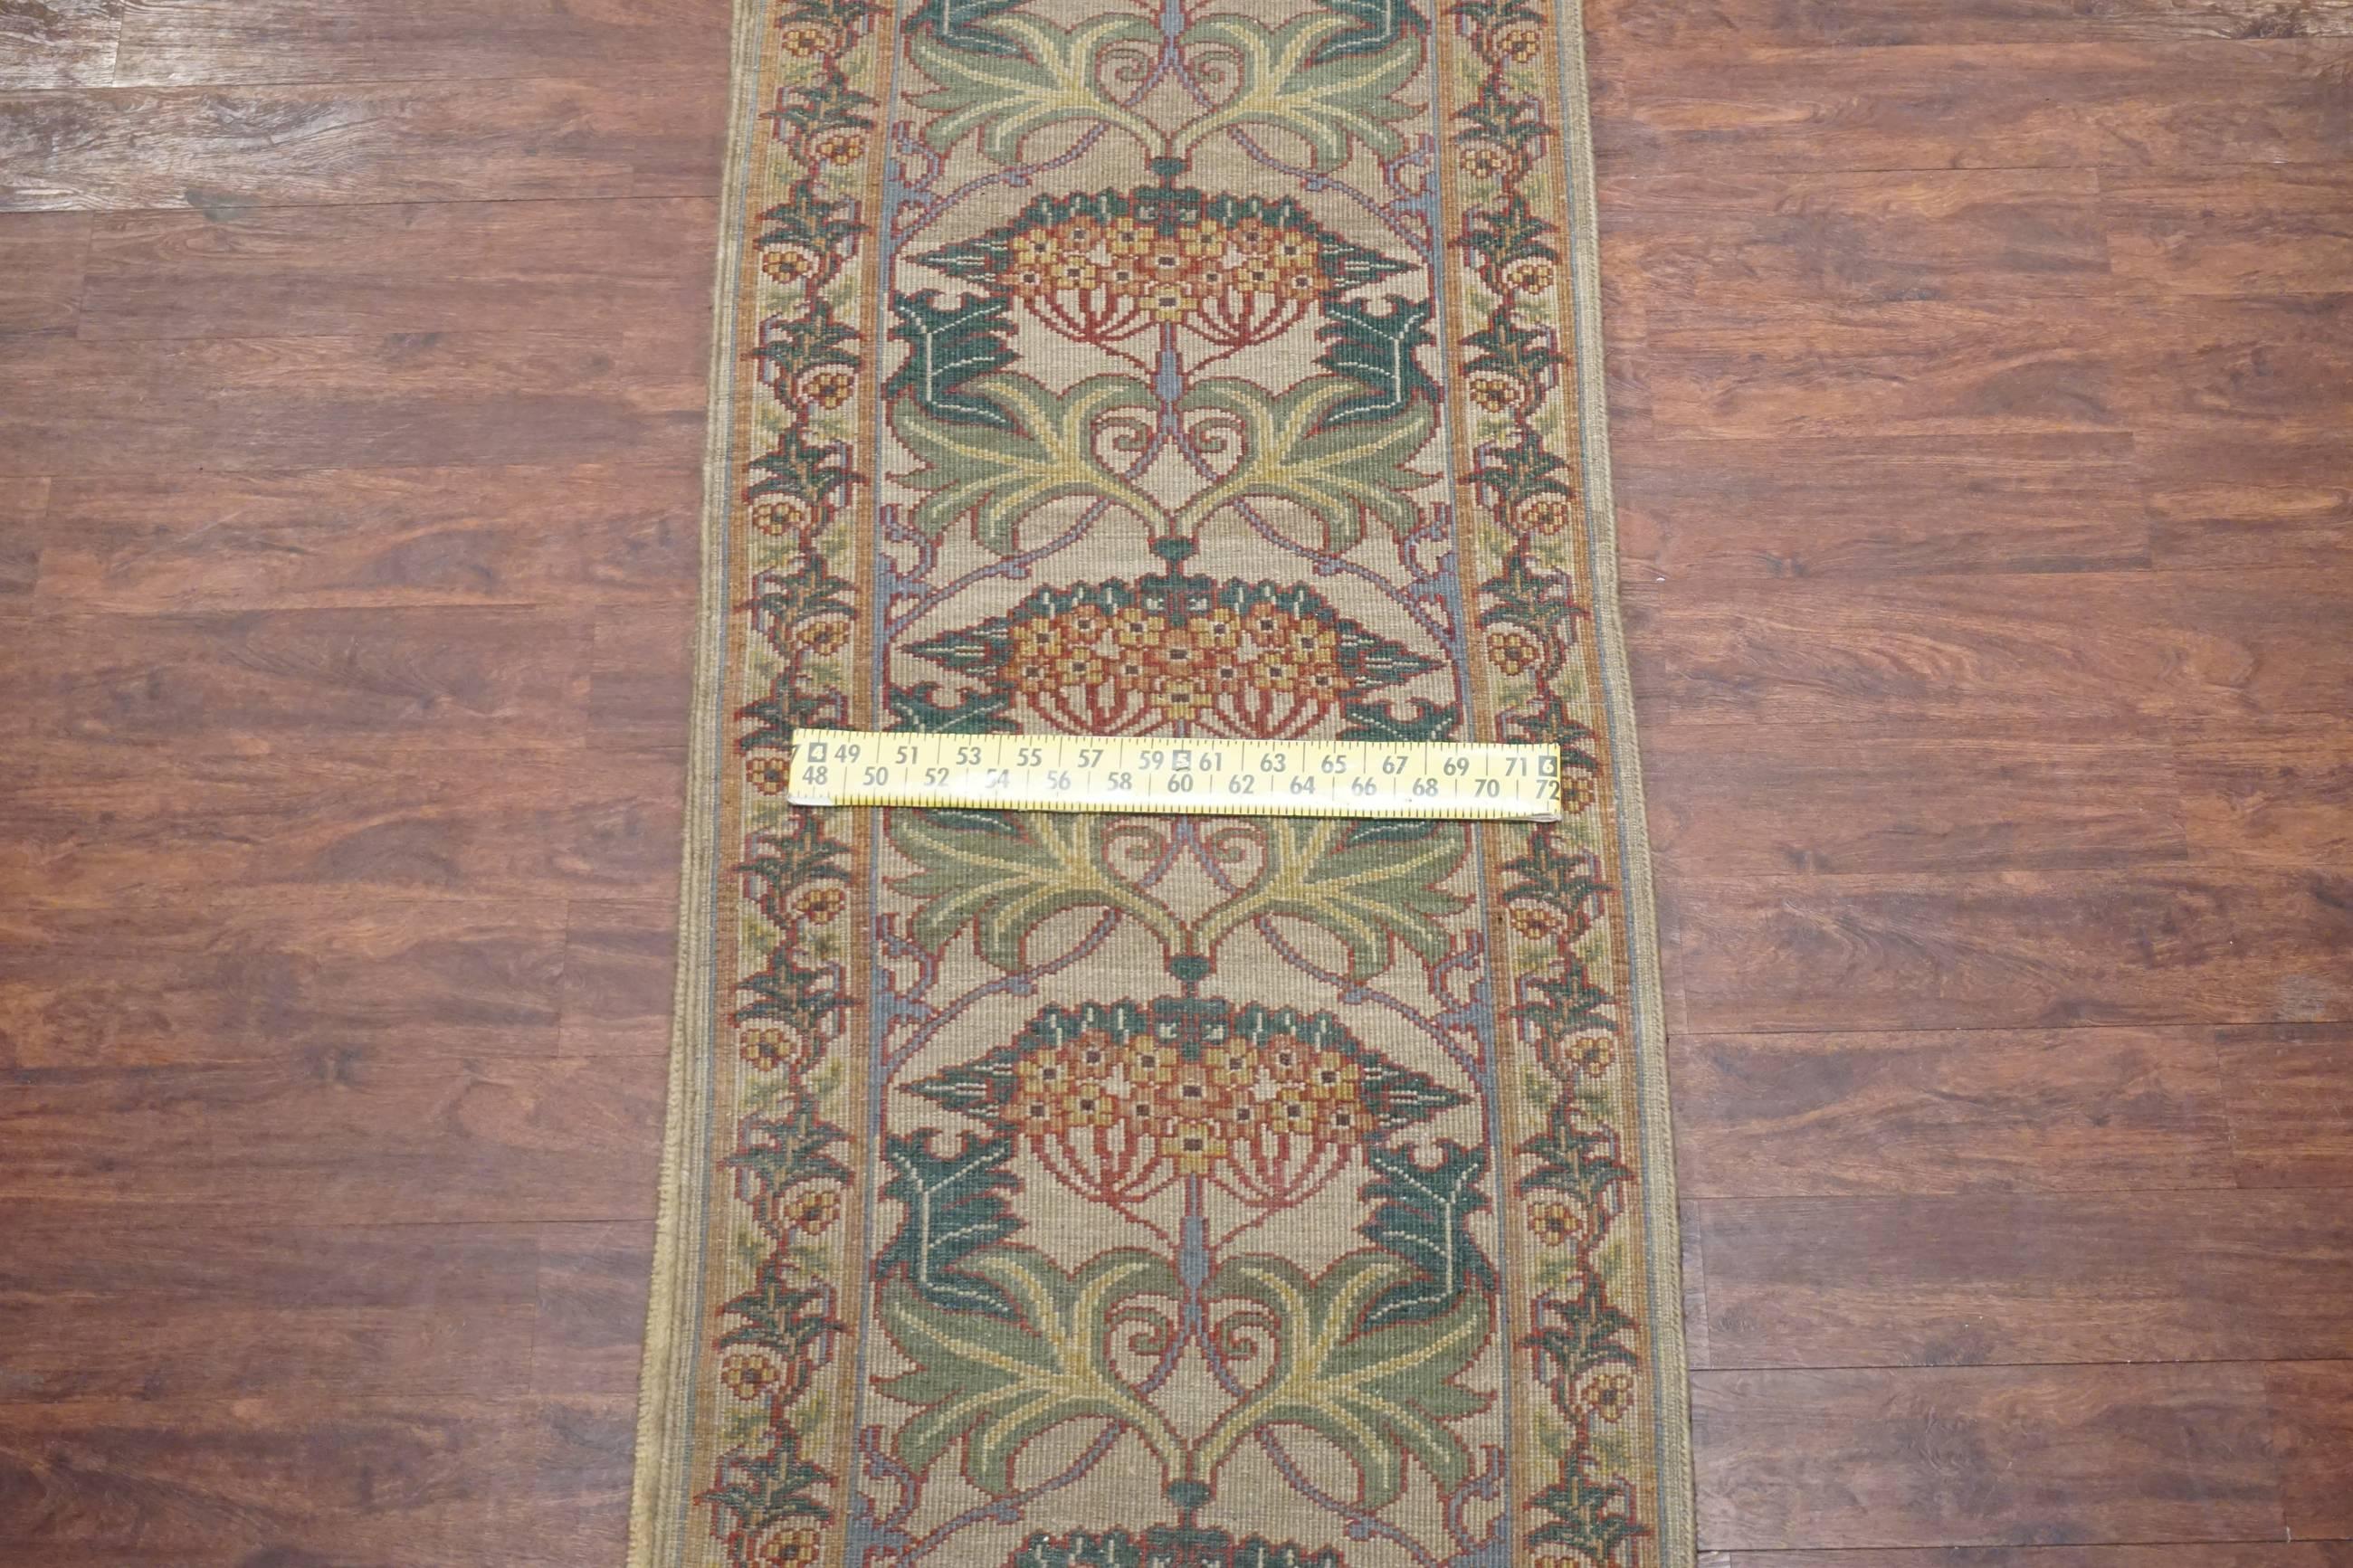 William Morris Hand-Knotted Arts & Crafts Runner In Excellent Condition For Sale In Northridge, CA